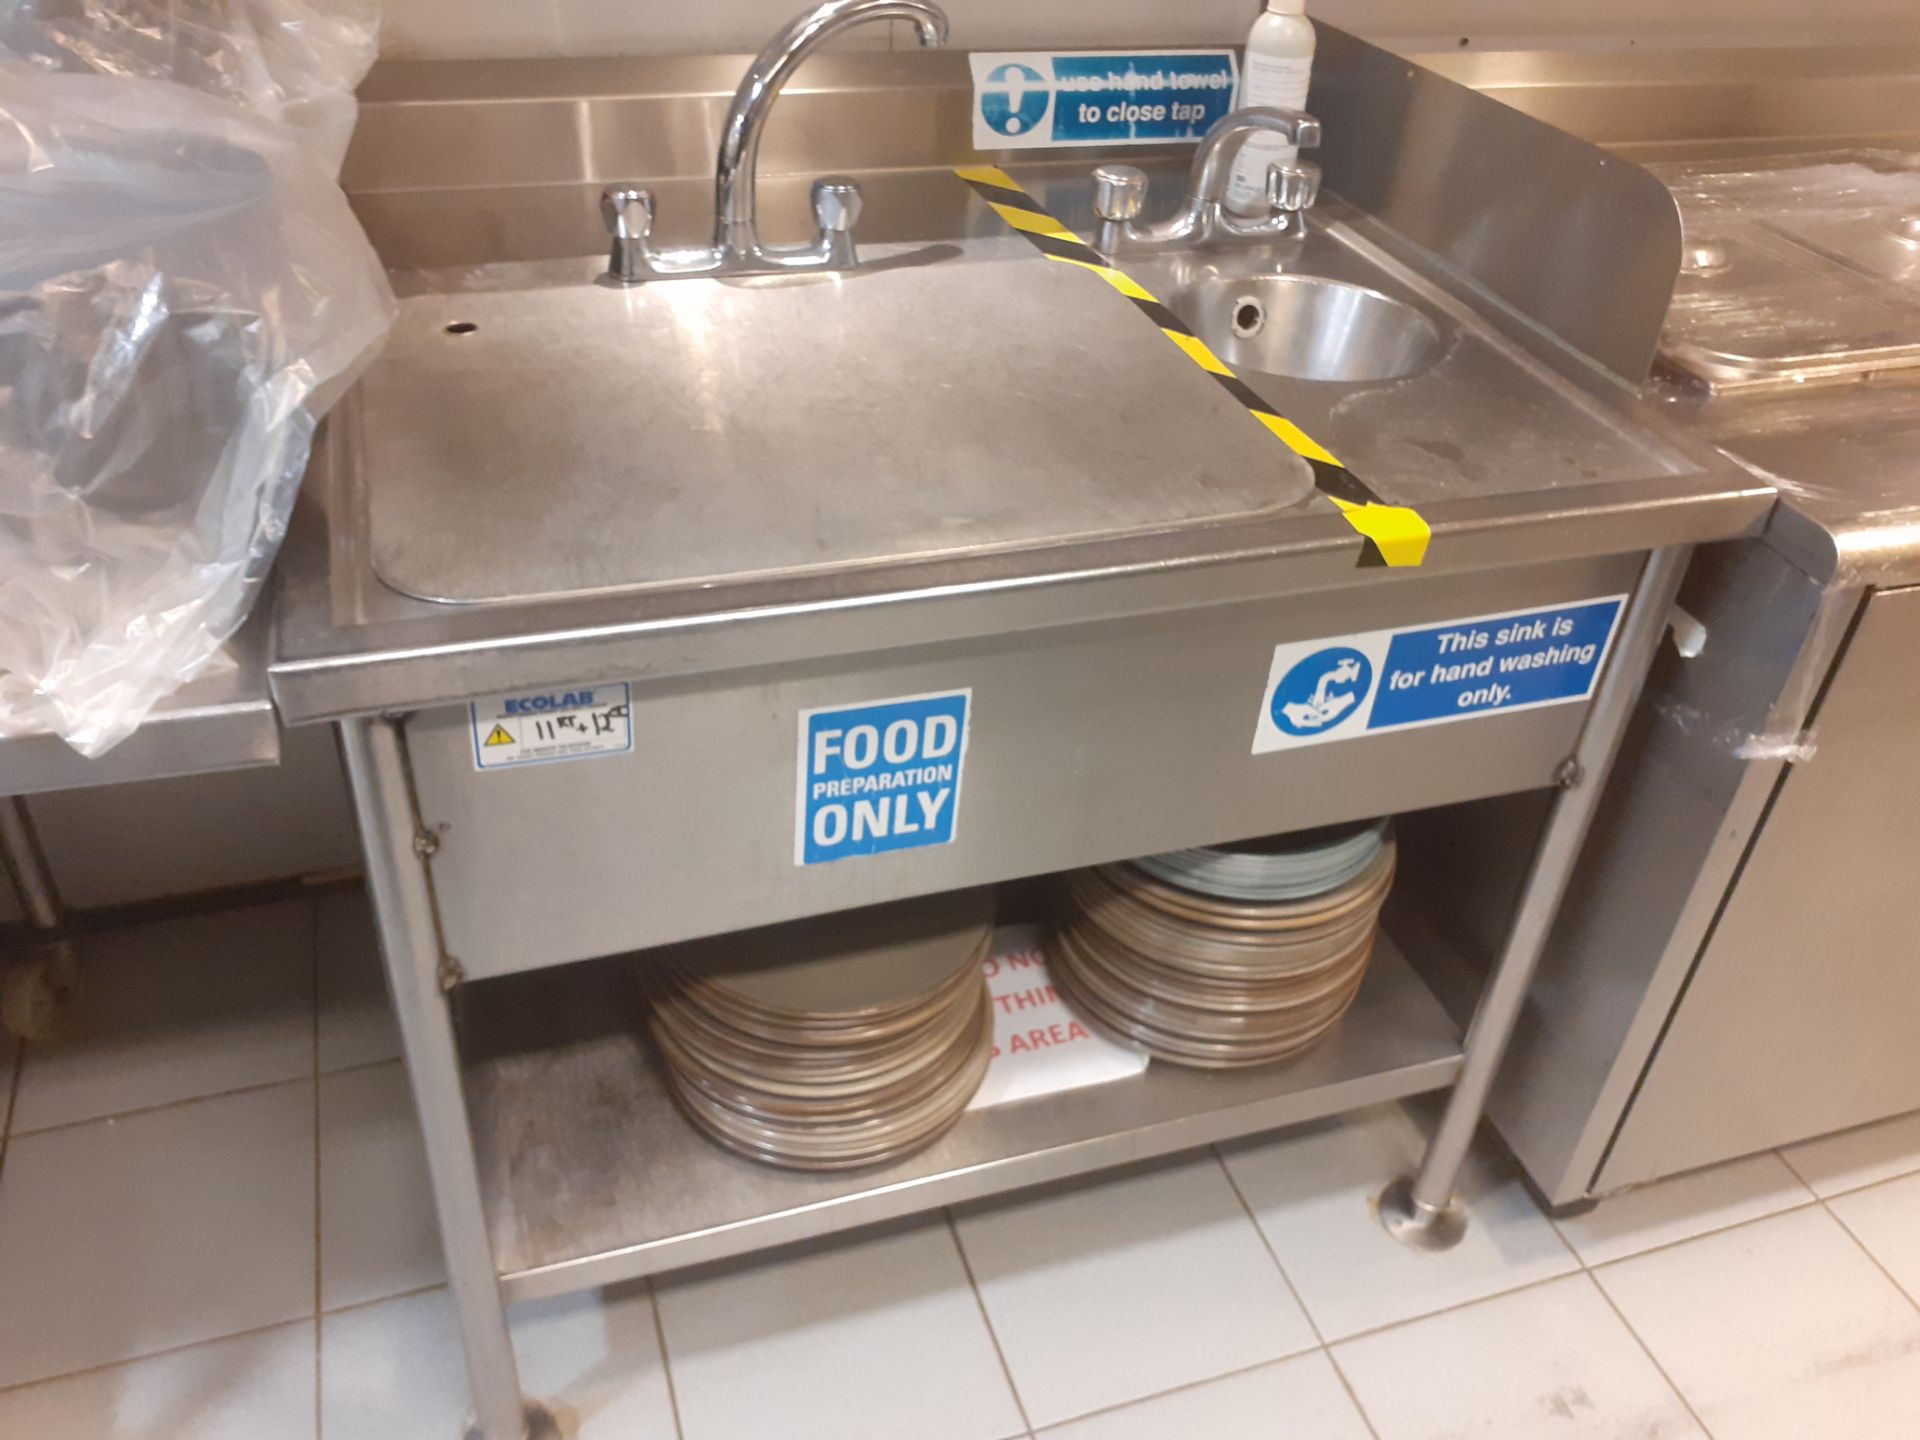 1 x Large Food Prep Sink Wash Unit With Mixer Taps and Hand Wash Basin - CL582 - Location: London